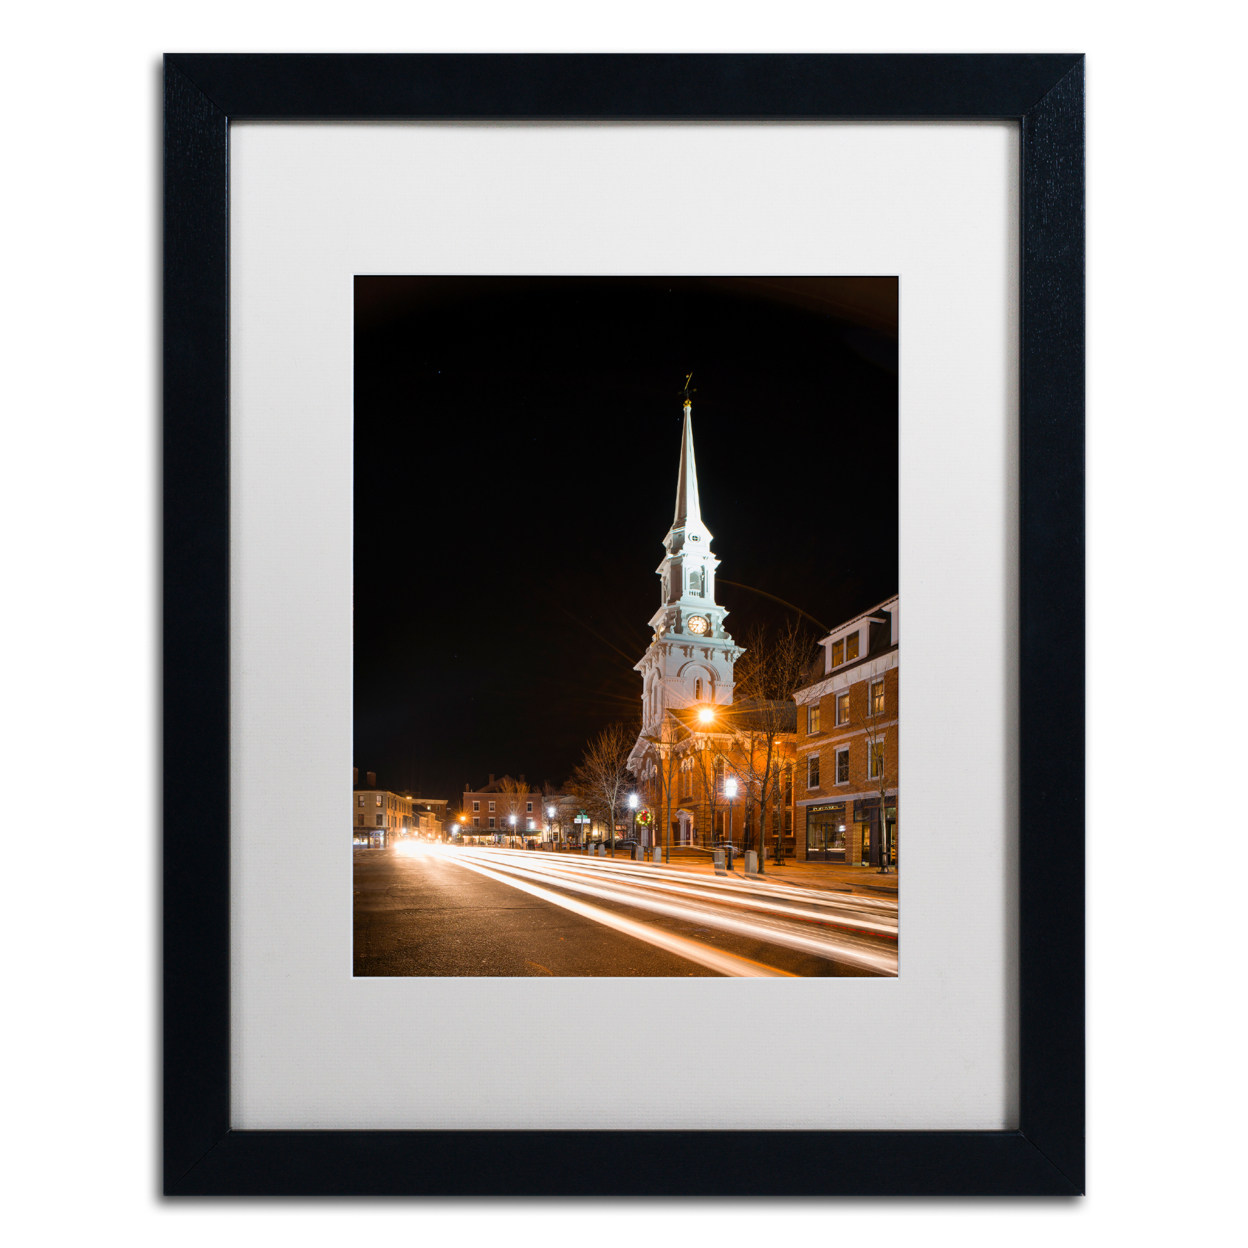 Michael Blanchette Photography 'Congress St Night' Black Wooden Framed Art 18 X 22 Inches